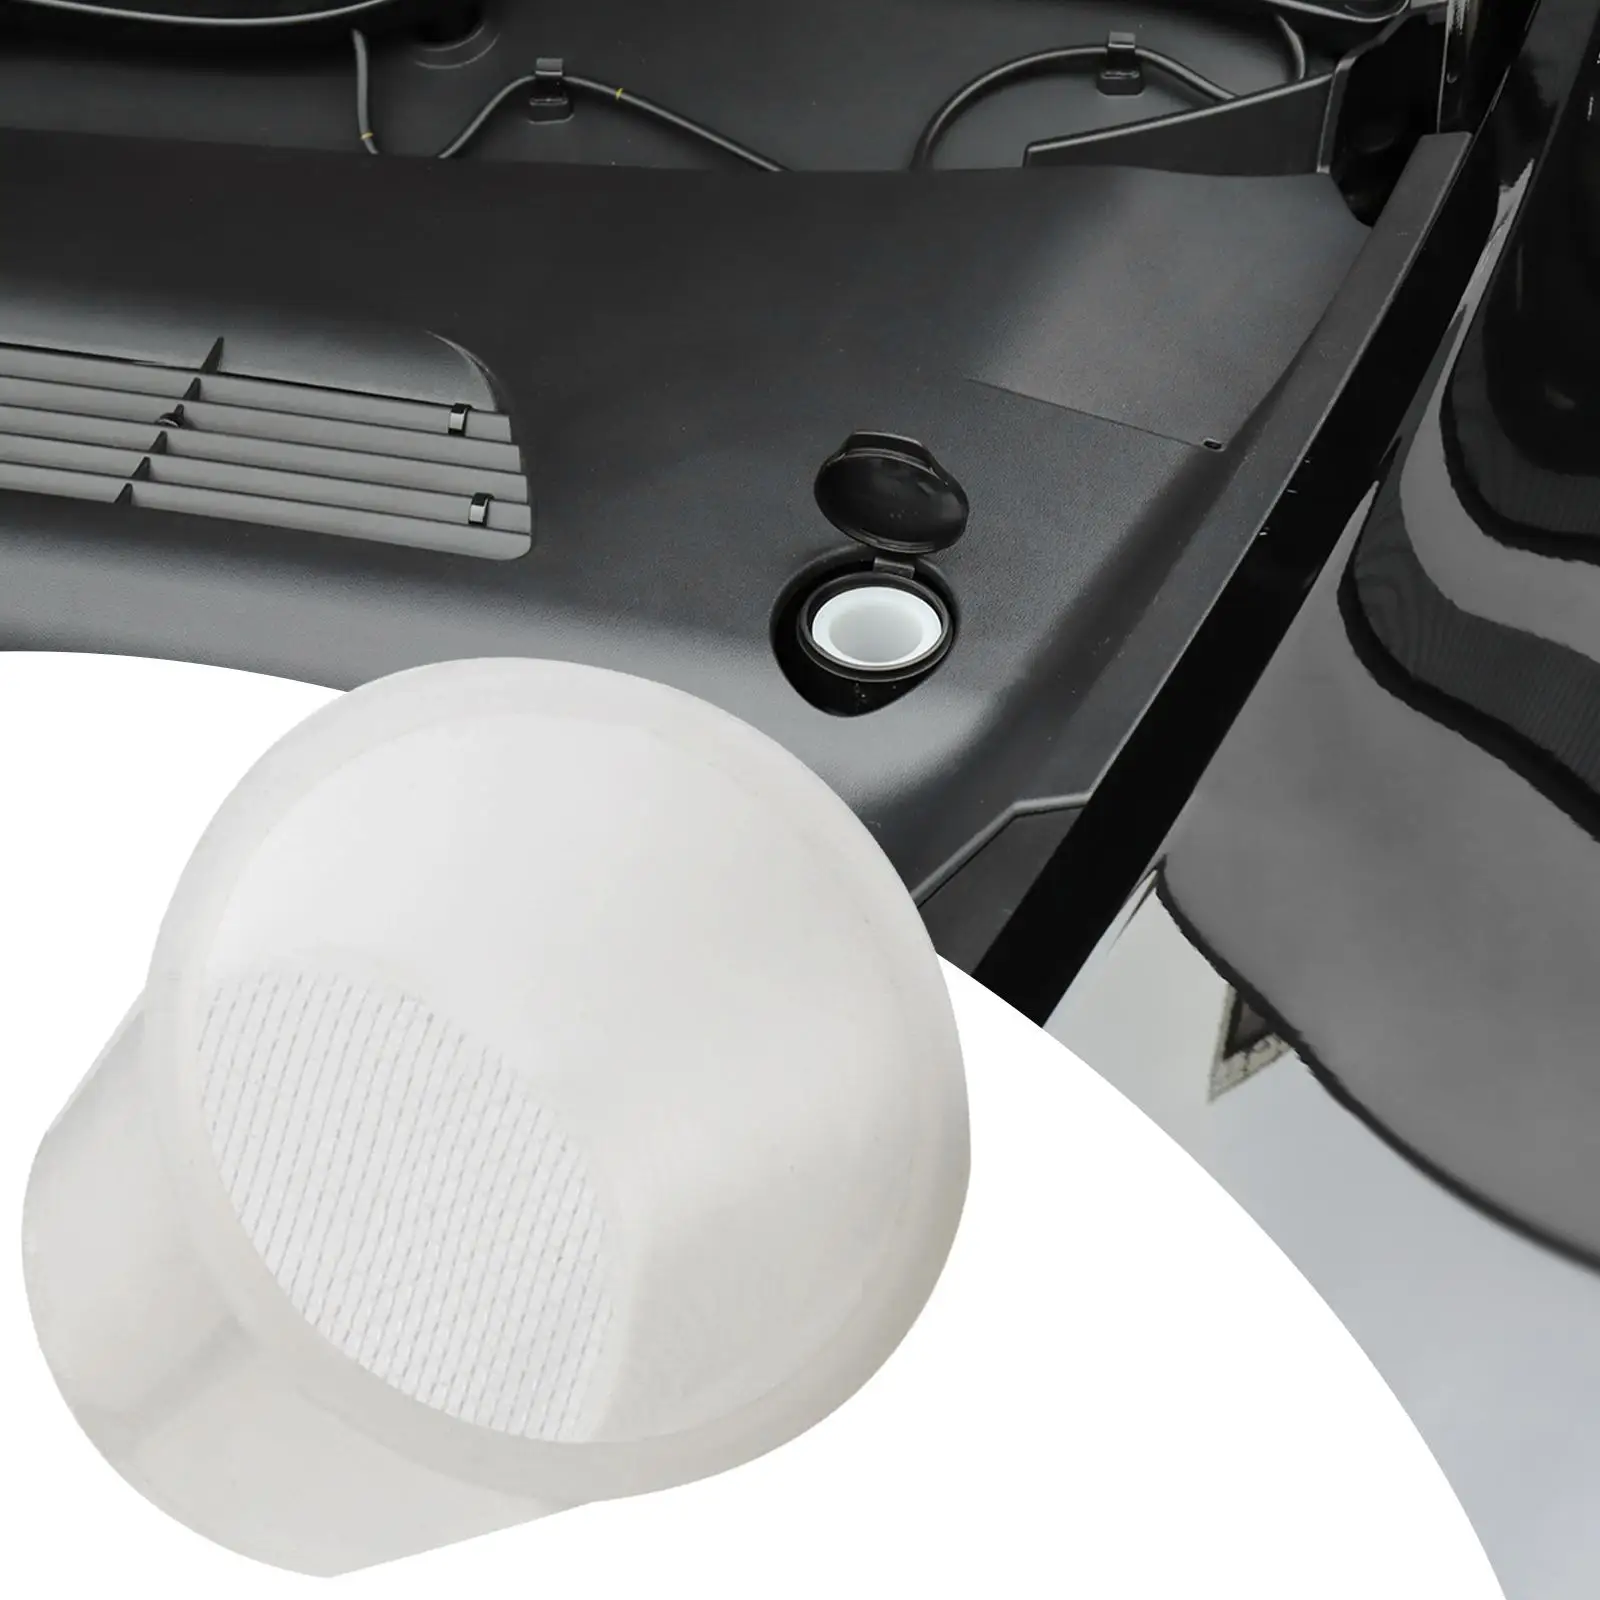 Tesla Model 3 HEPA Filter Reduction Replaces Washer Chlorine G for Car